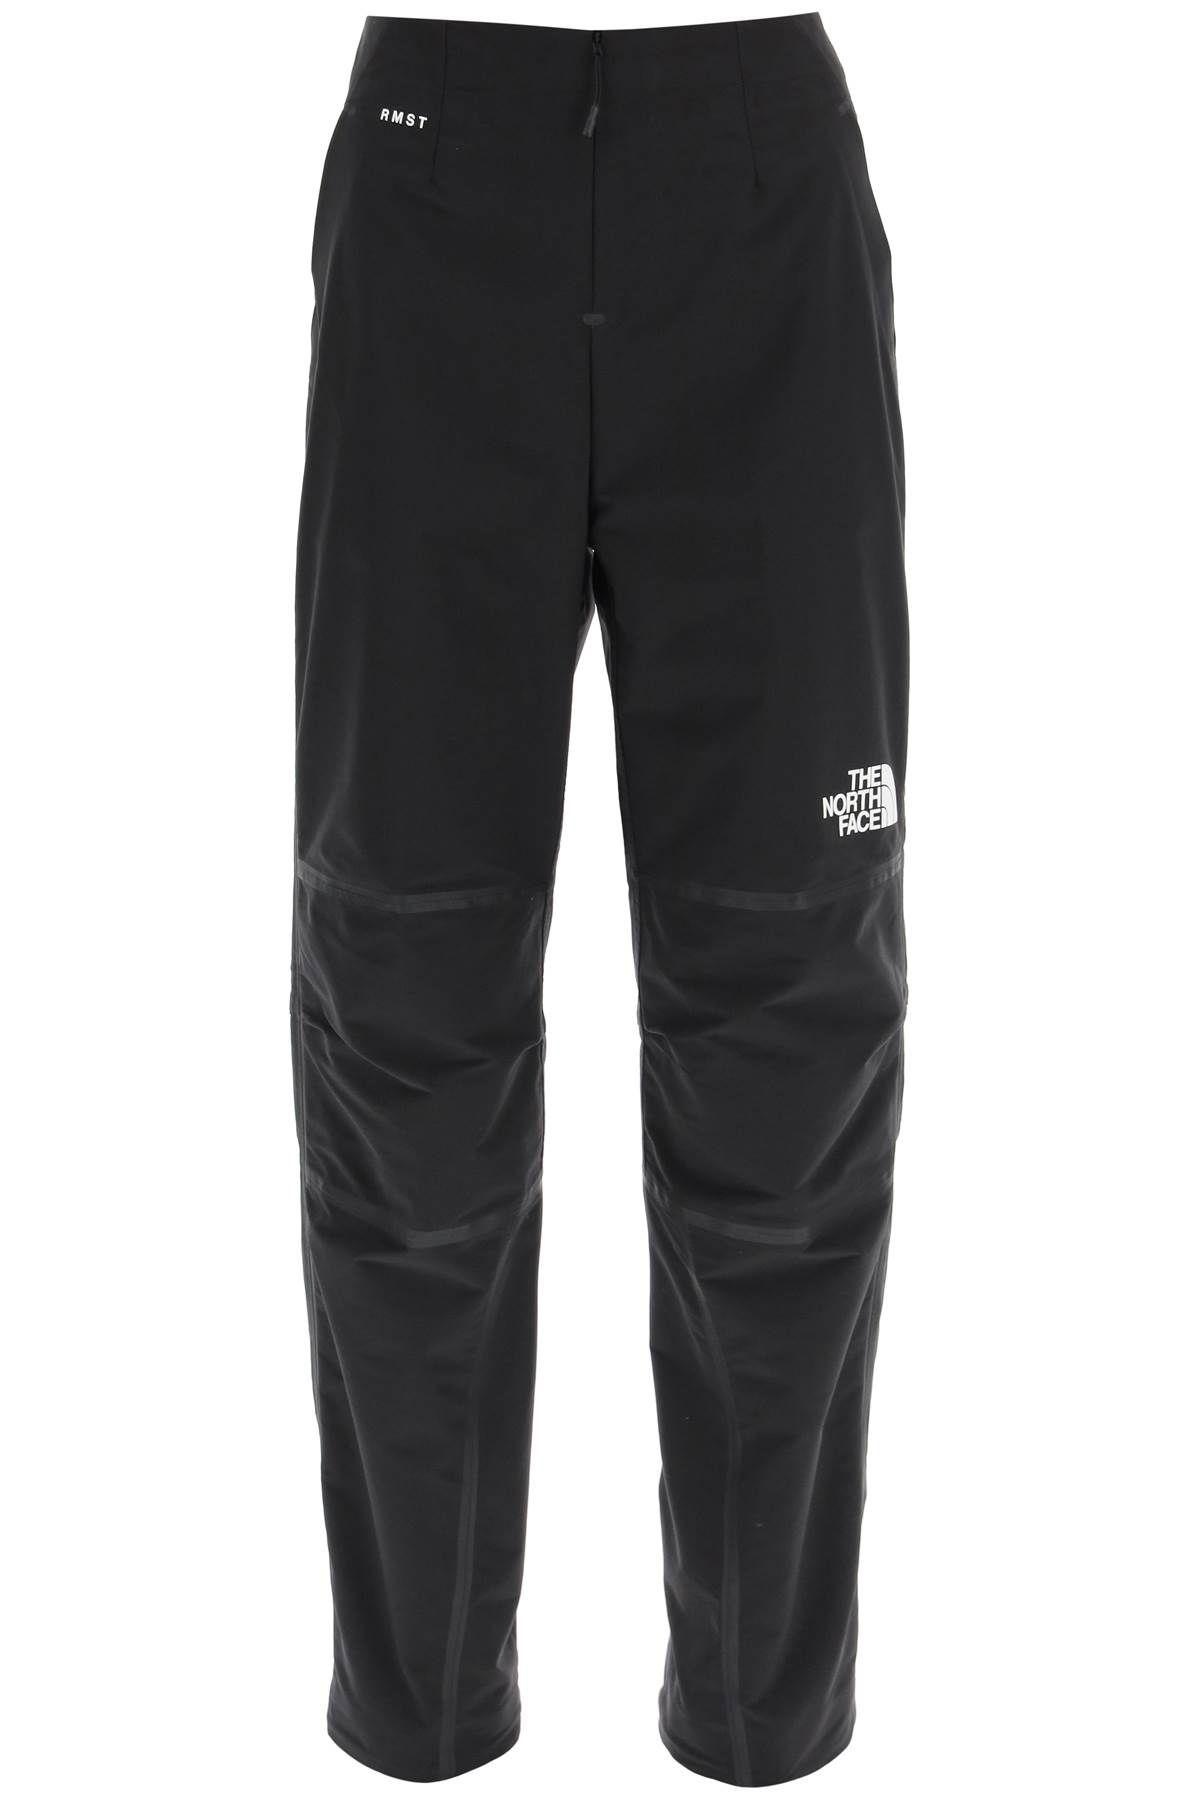 'MOUNTAIN RMST' PANTS THE NORTH FACE - 1